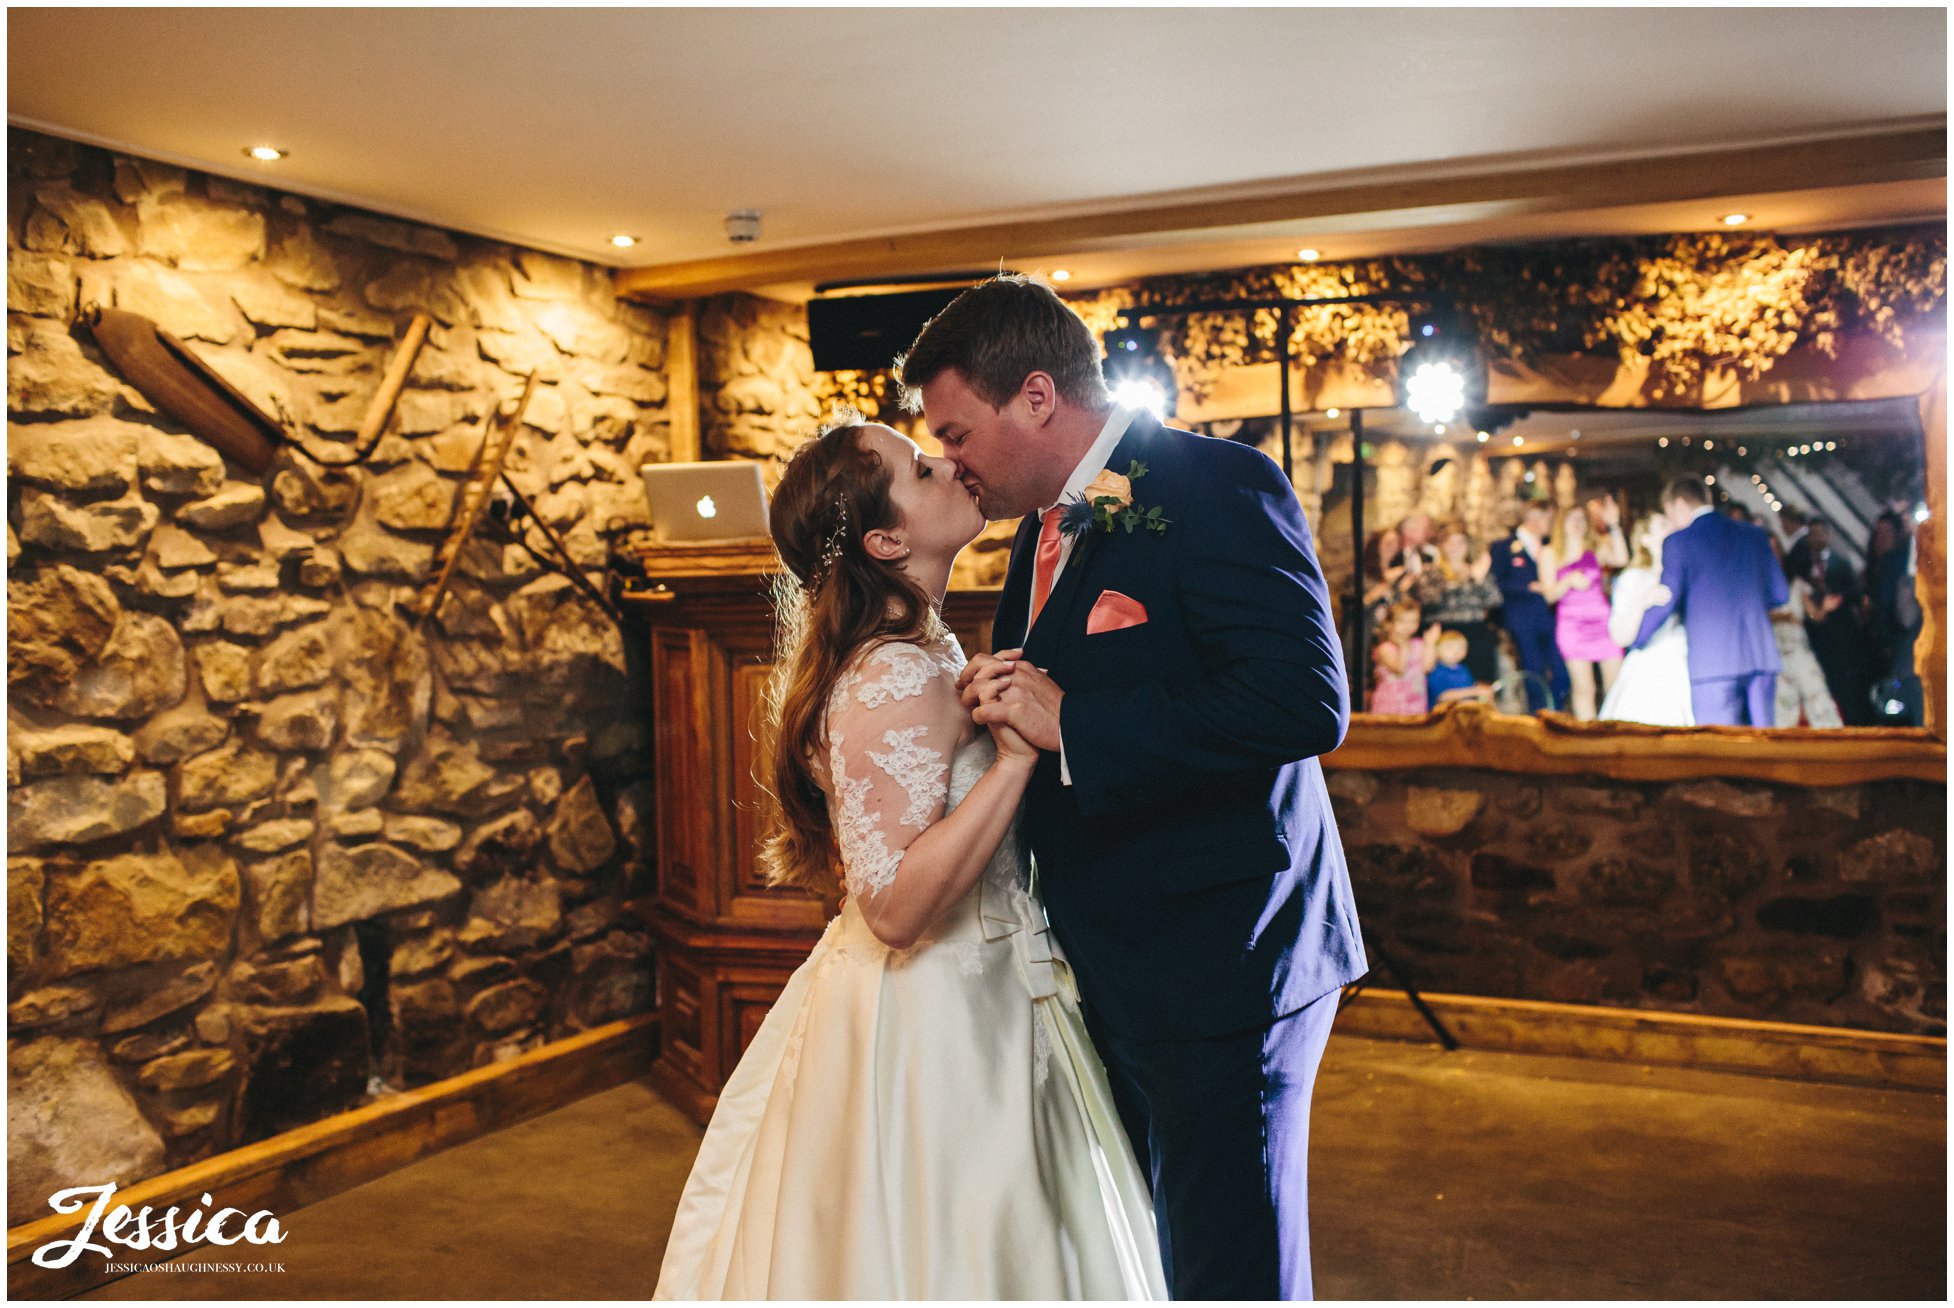 bride & groom kiss during their first dance in the old barn